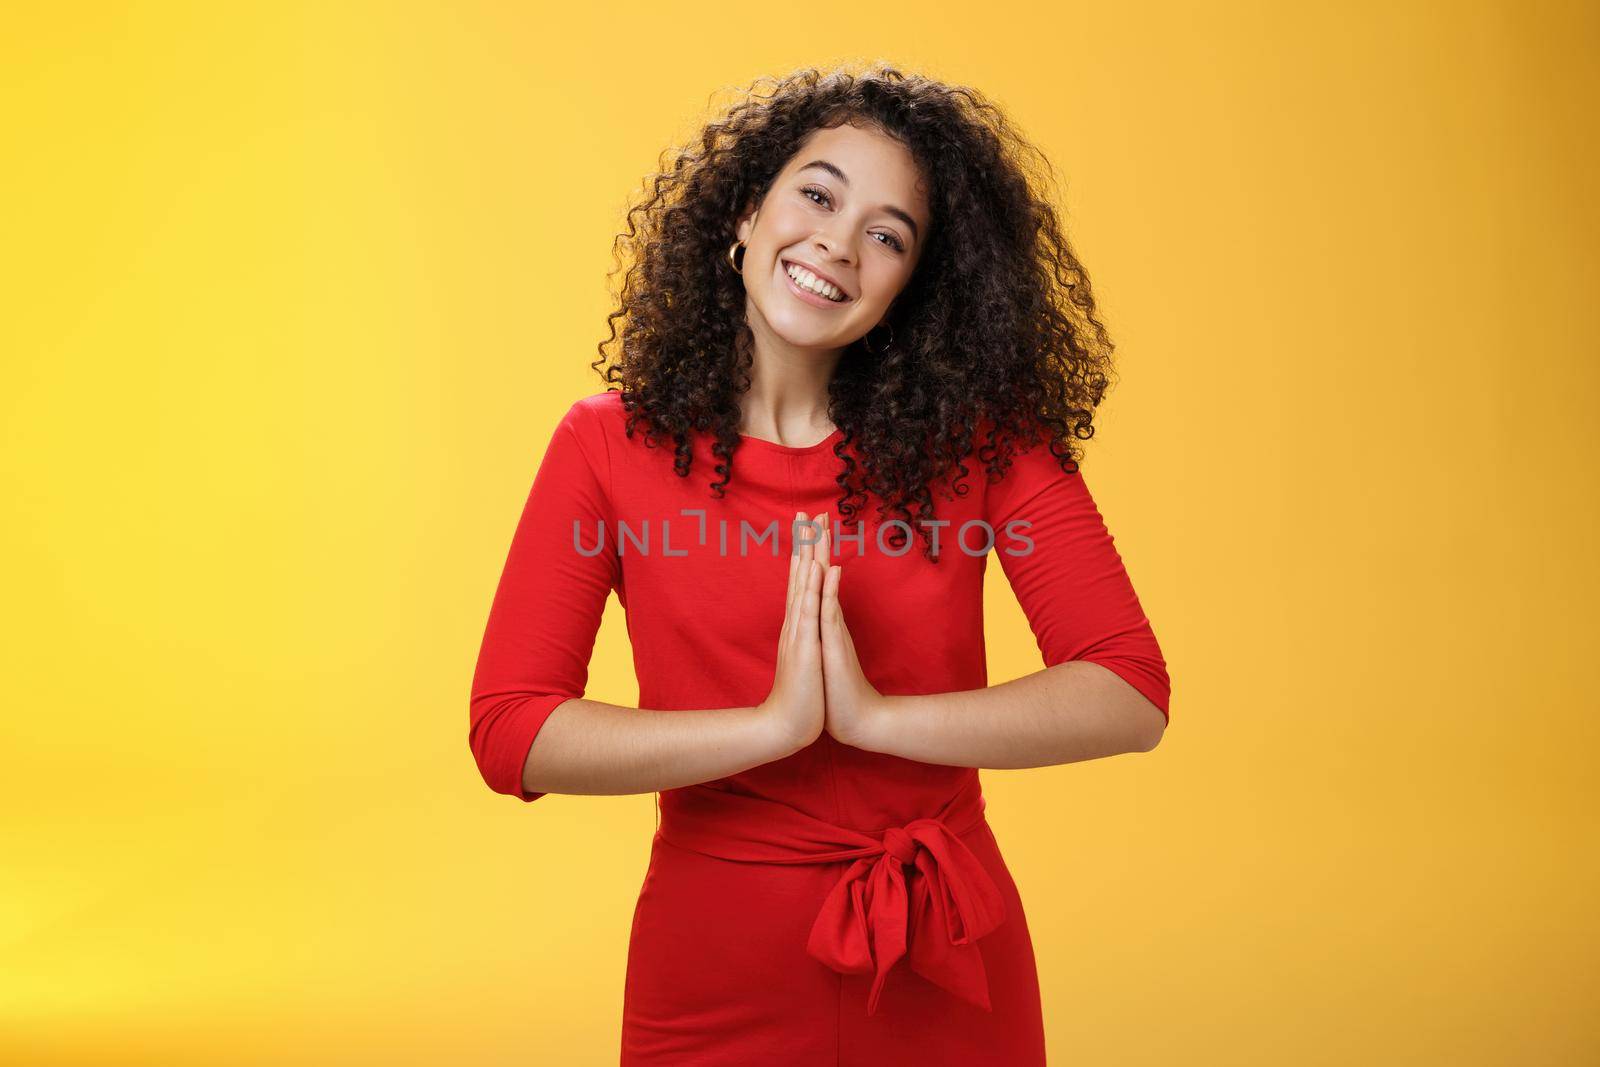 Welcome come inside. Portrait of friendly and polite good-looking female host in red dress with curly hair holding hands in namaste gesture tilting head and smiling as inviting guests in asian style.